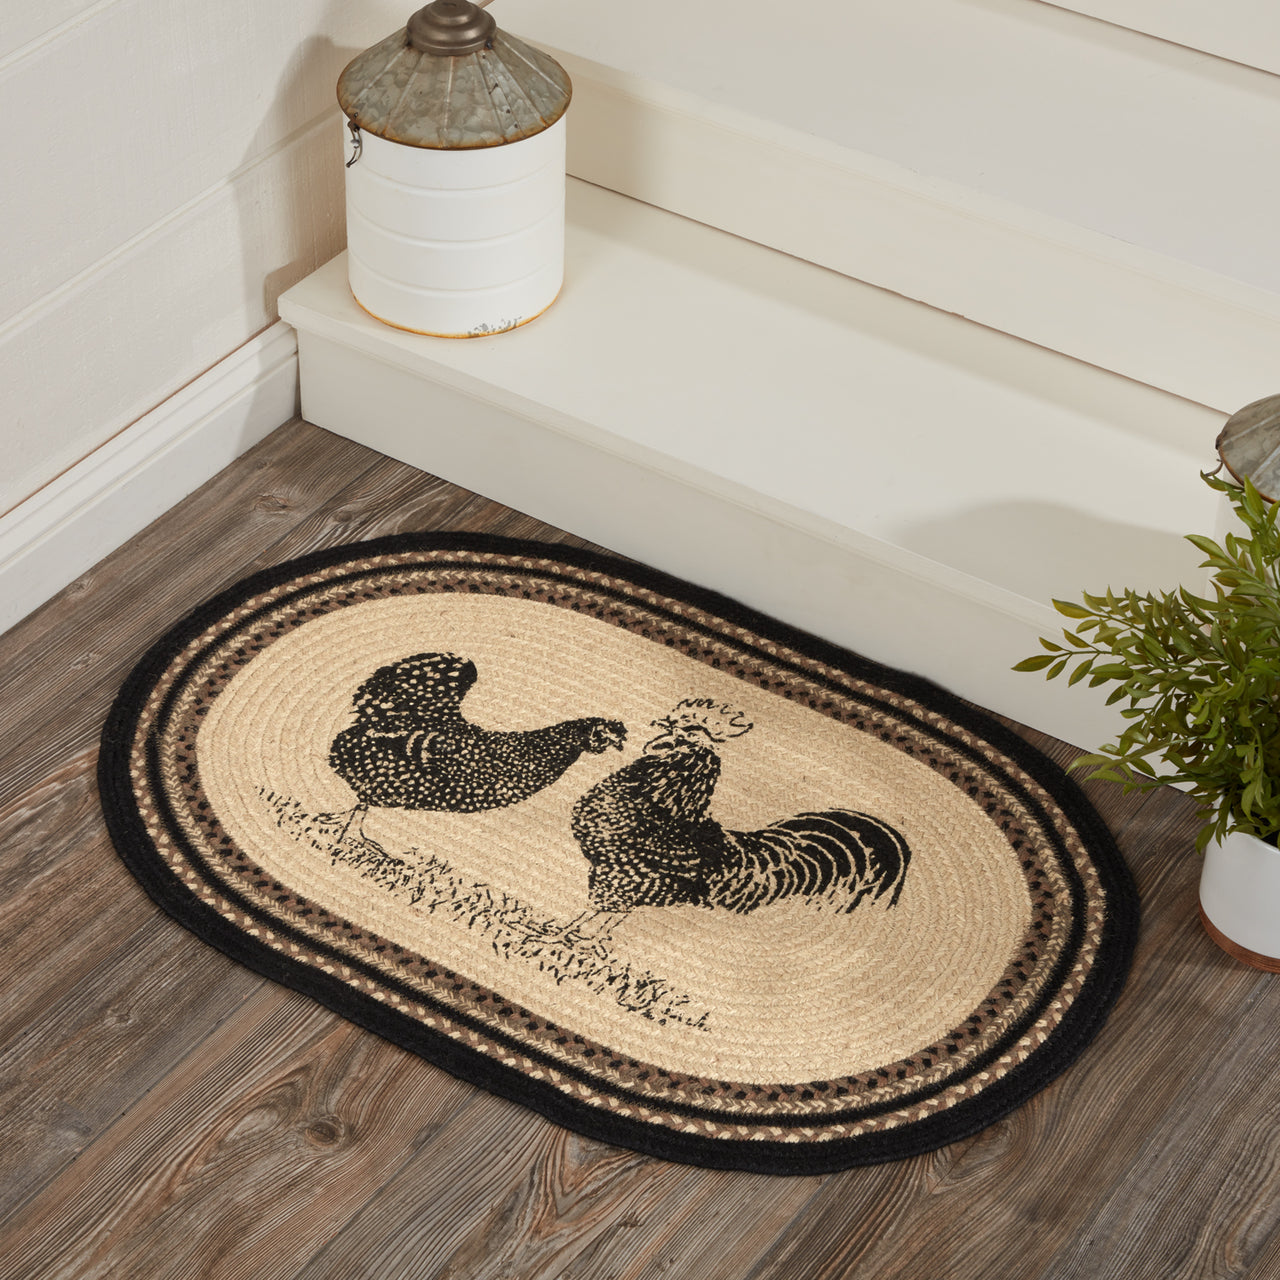 Sawyer Mill Charcoal Poultry Jute Braided Rug Oval 20"x30" with Rug Pad VHC Brands